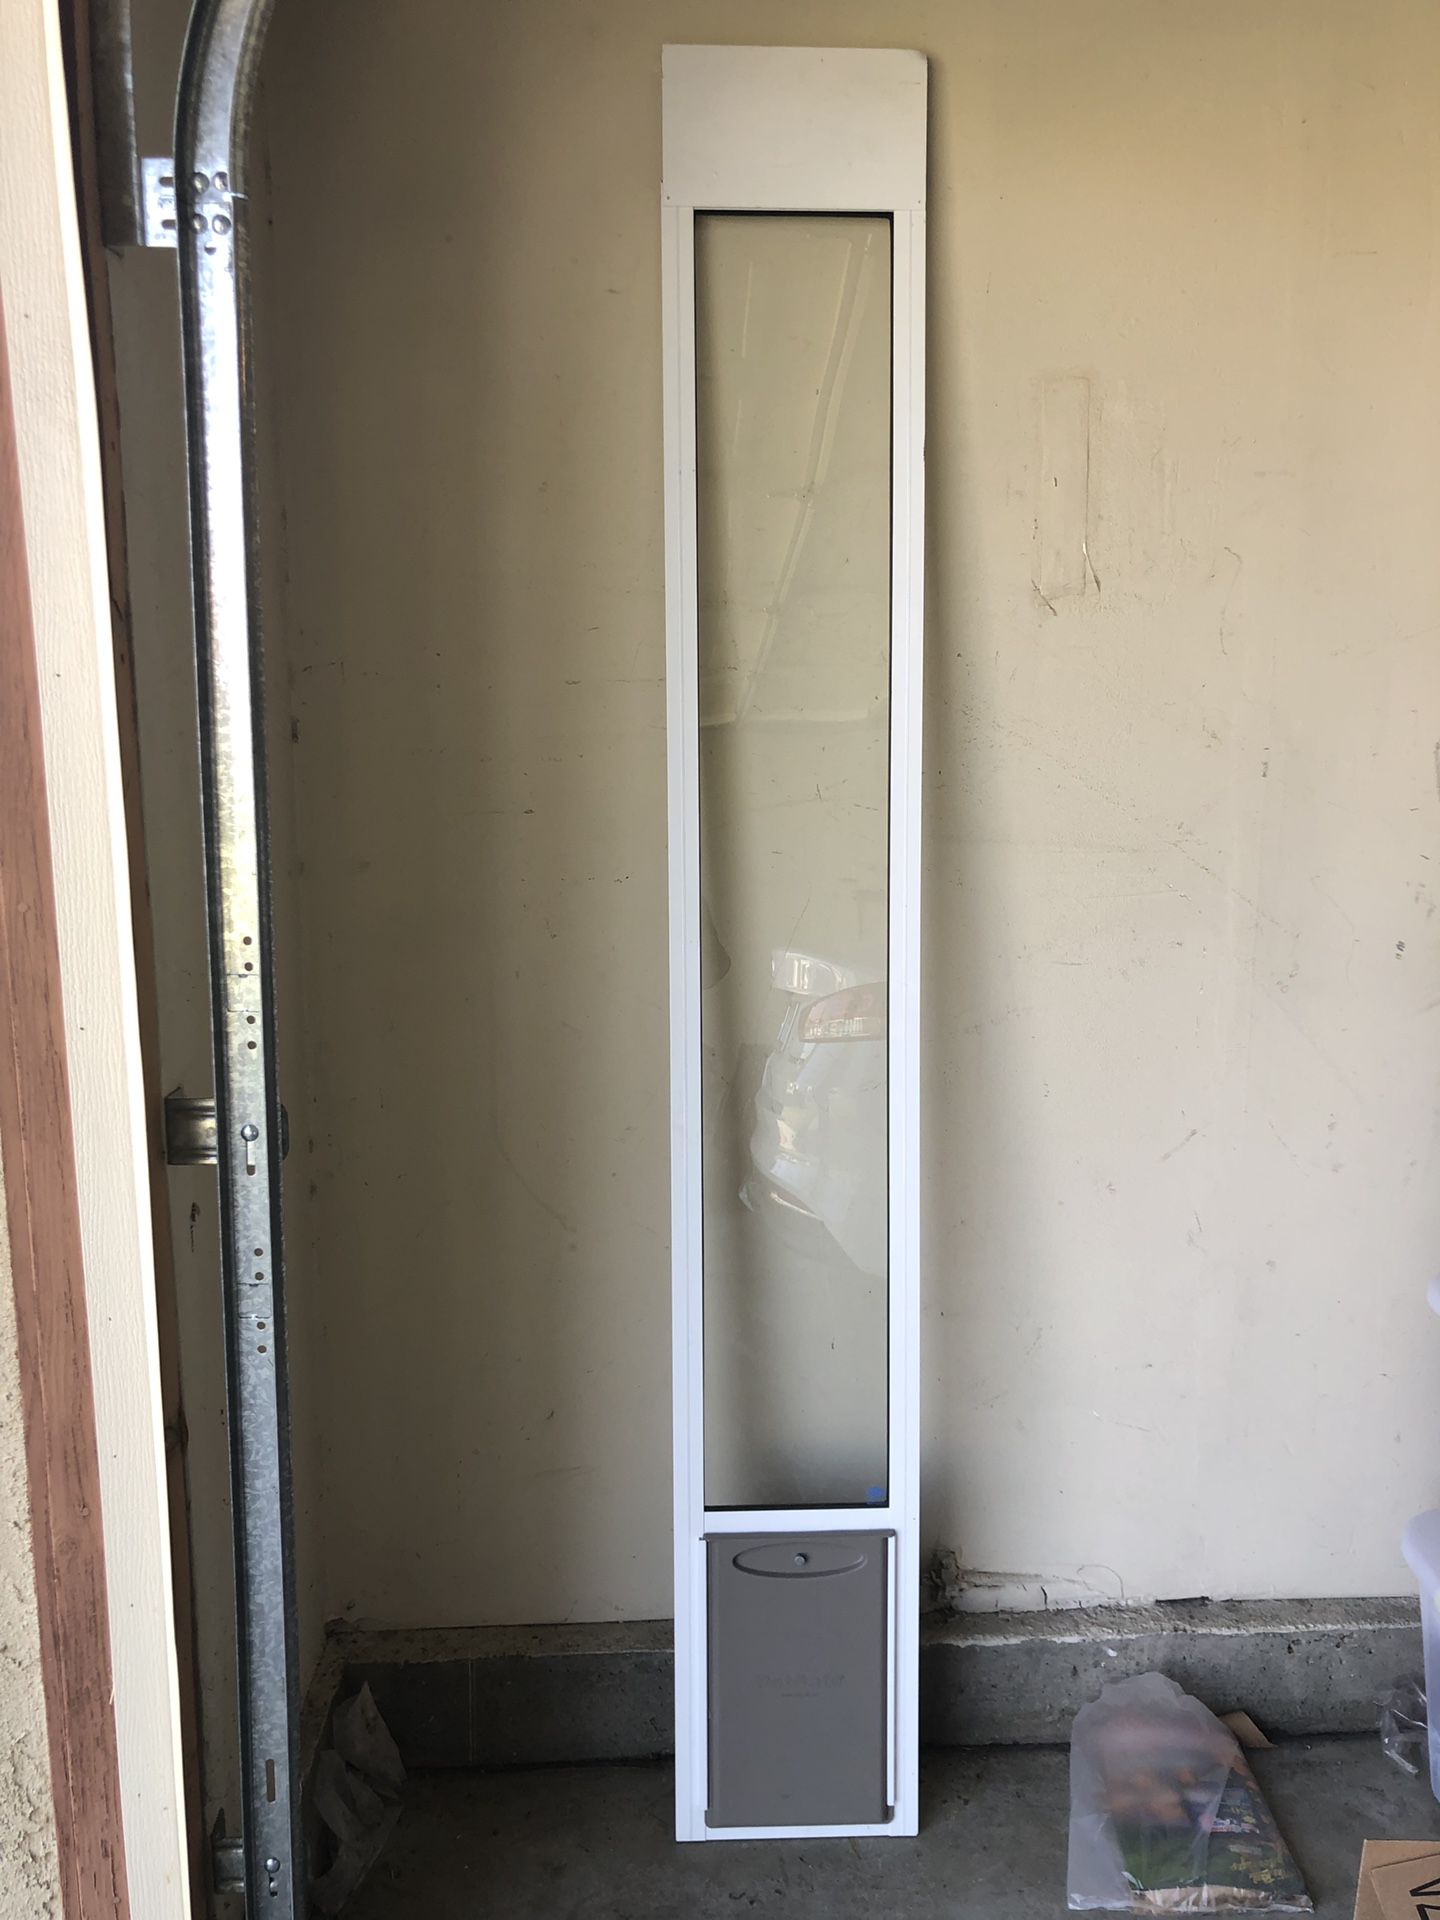 Like new small doggy door for sliding glass door. Used once